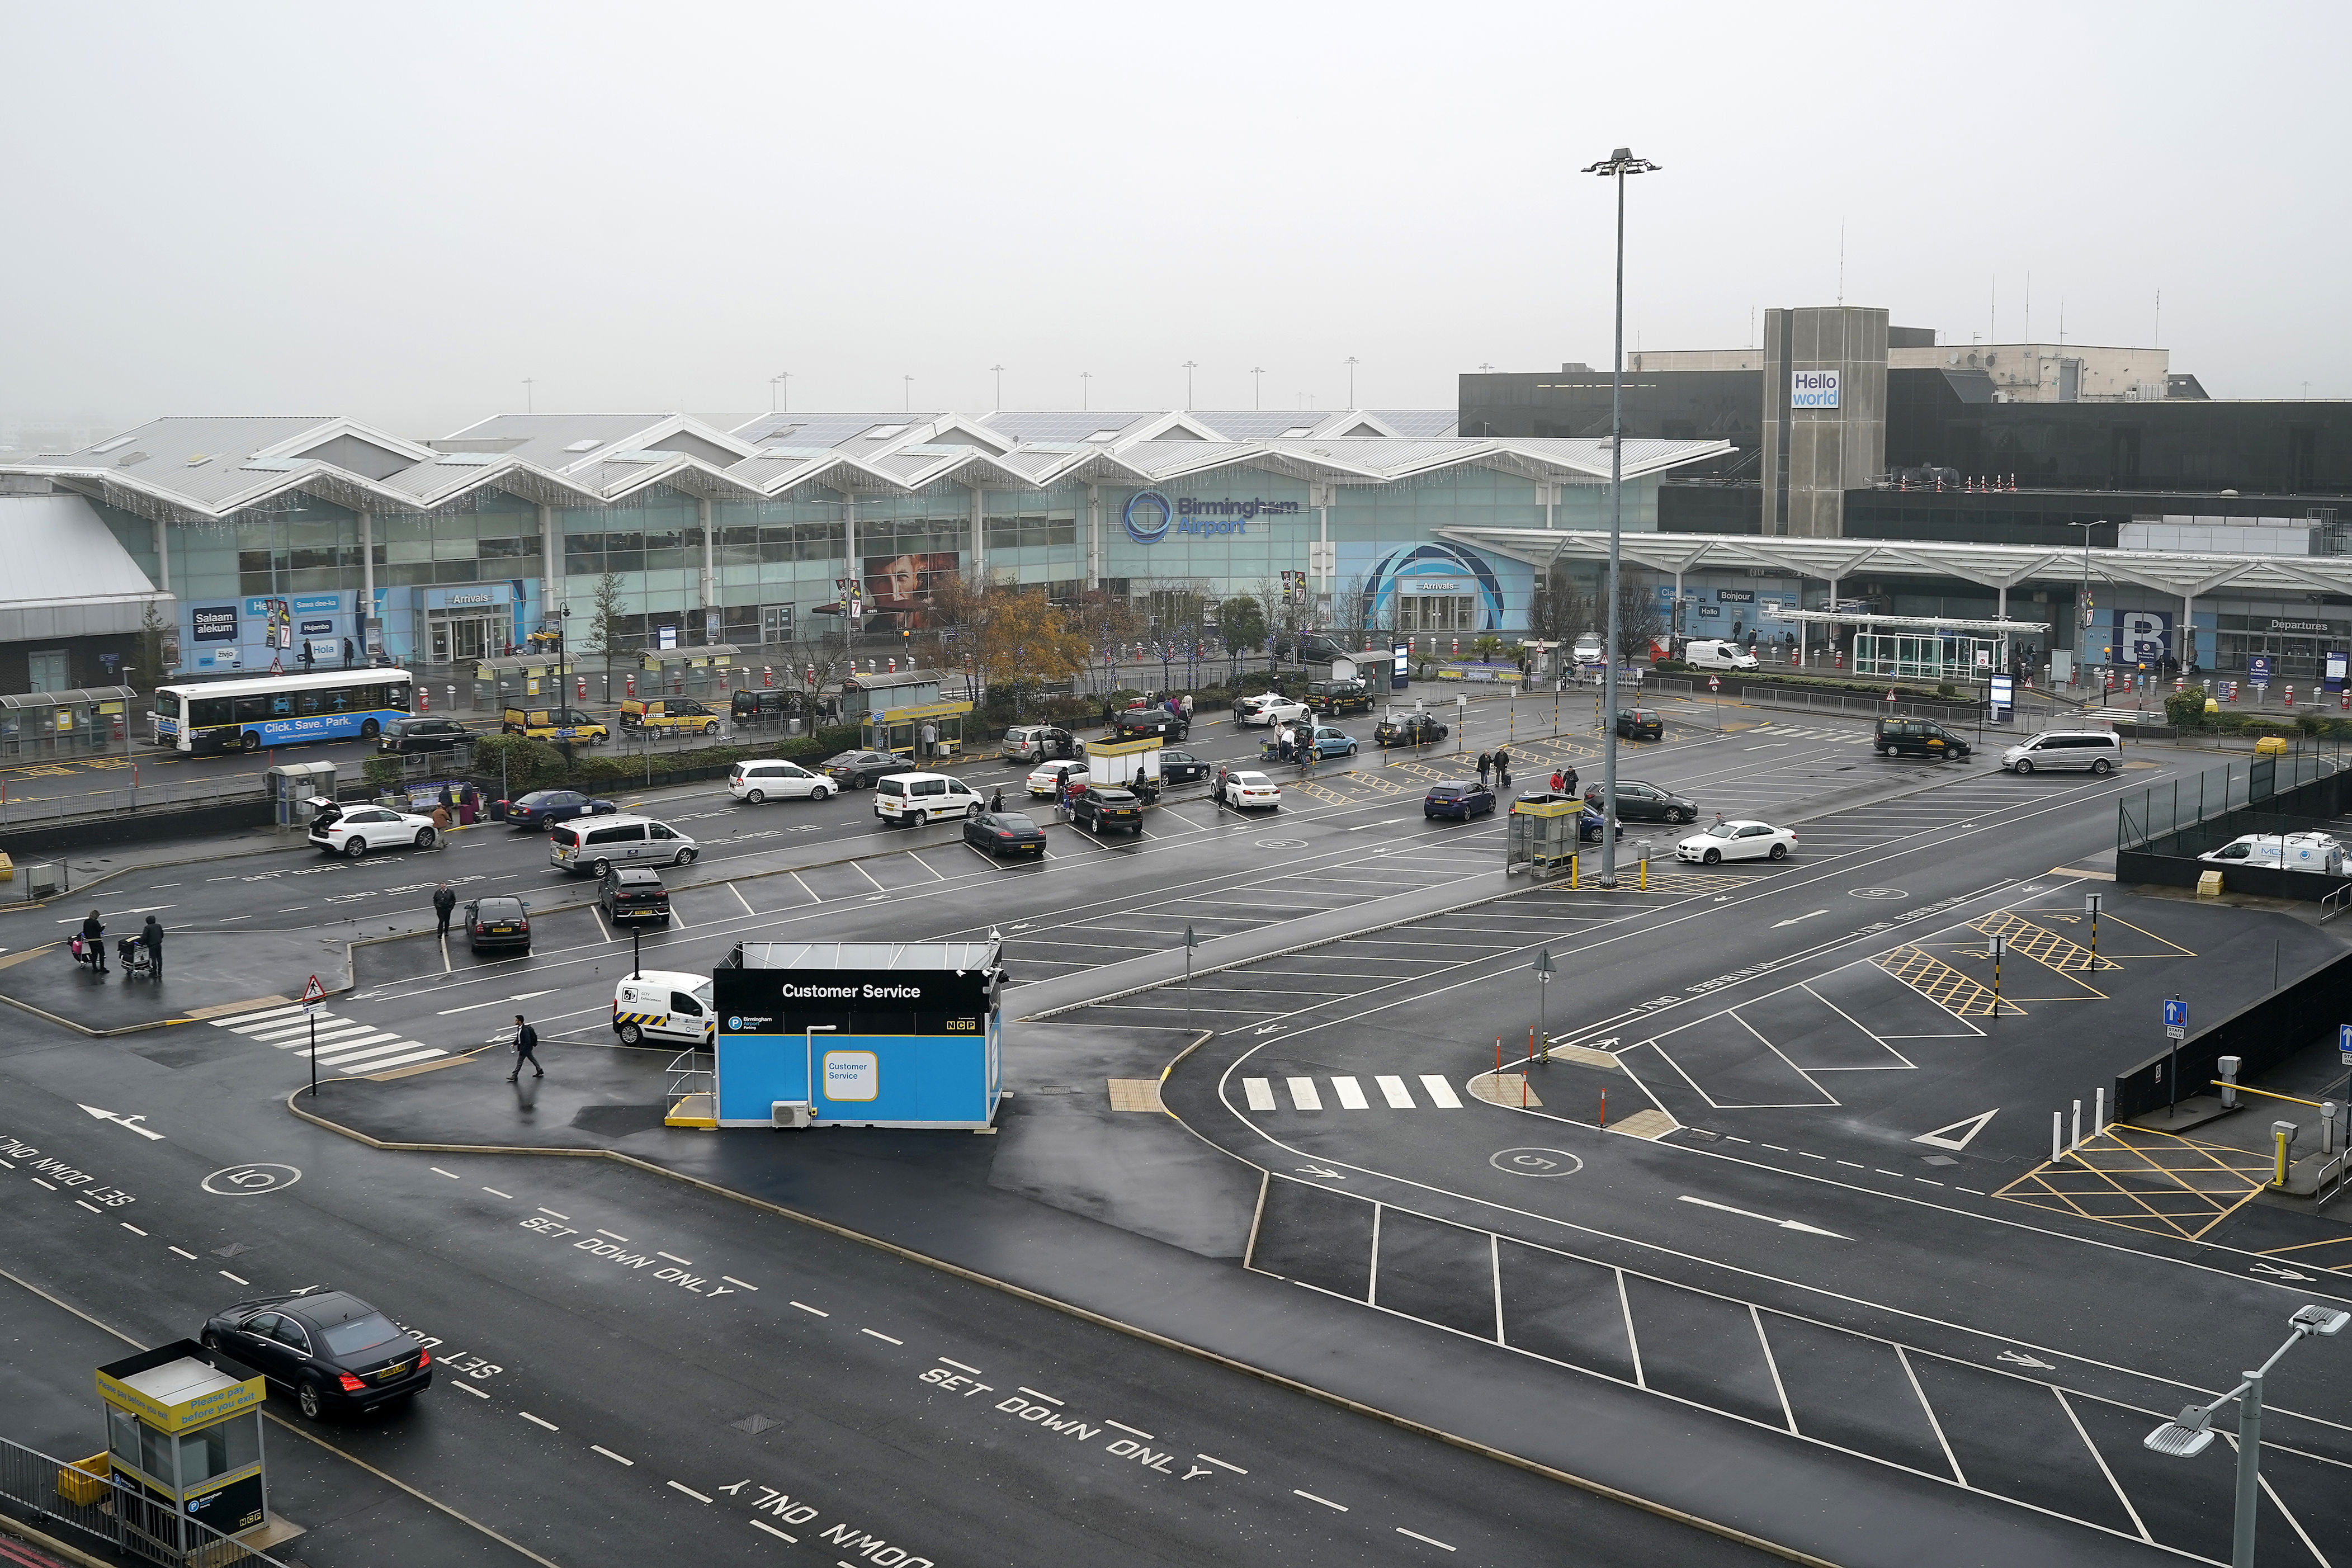 birmingham airport suspends operations after suspicious device found on aer lingus flight to belfast